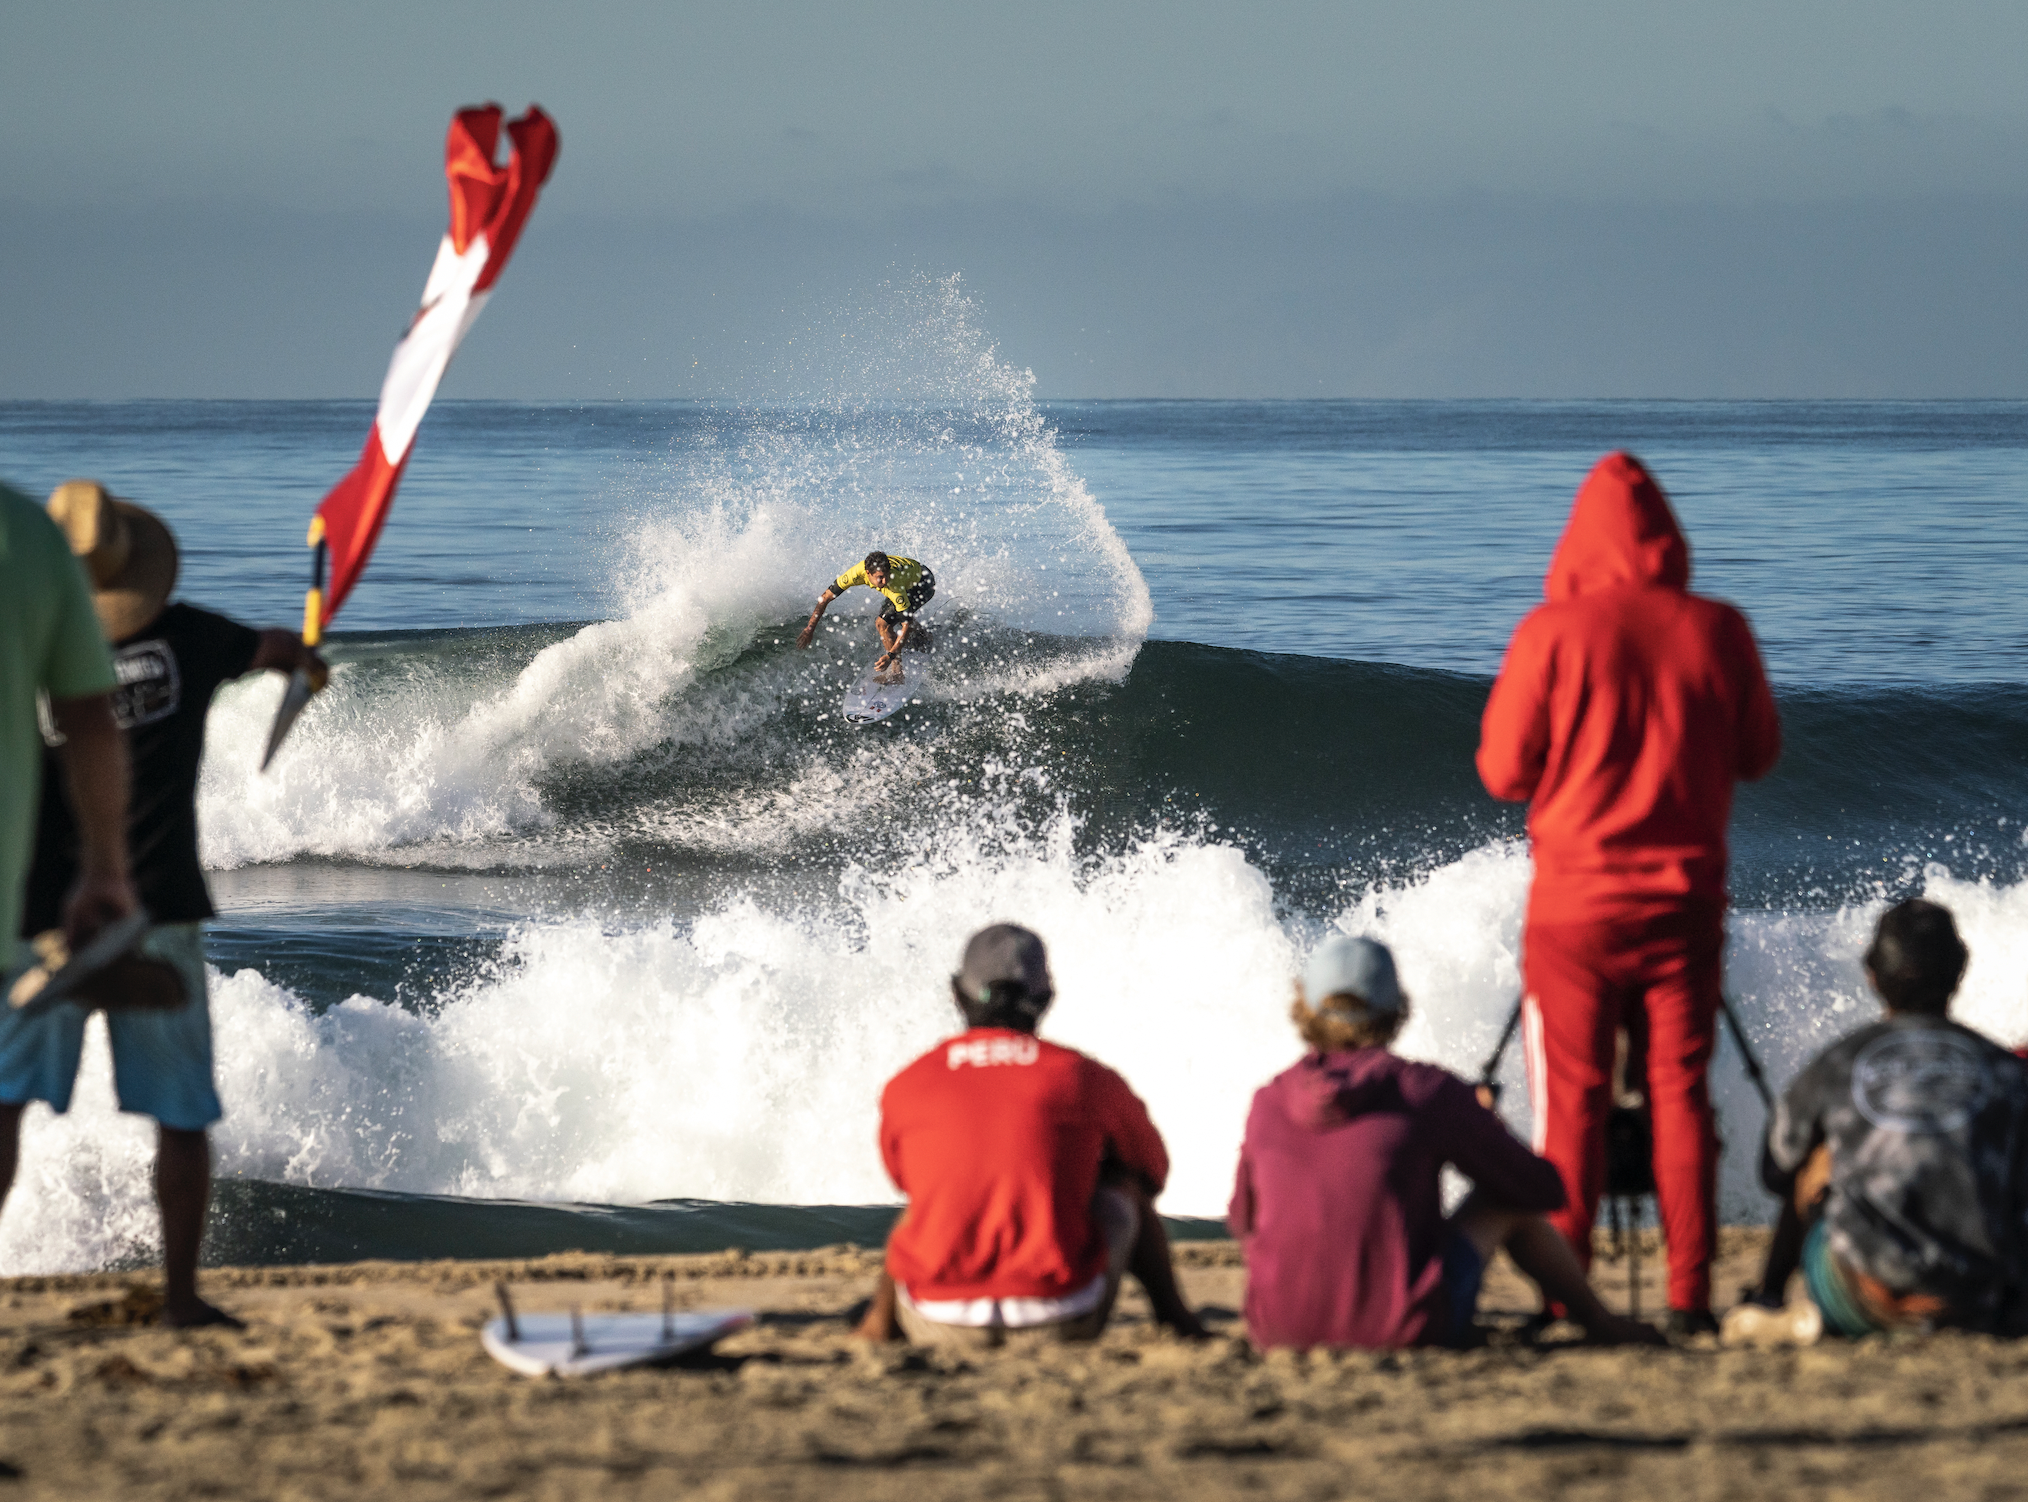 Two days remain in the ISA World Surfing Championships at California's Huntingdon Beach ©ISA/Sean Evans